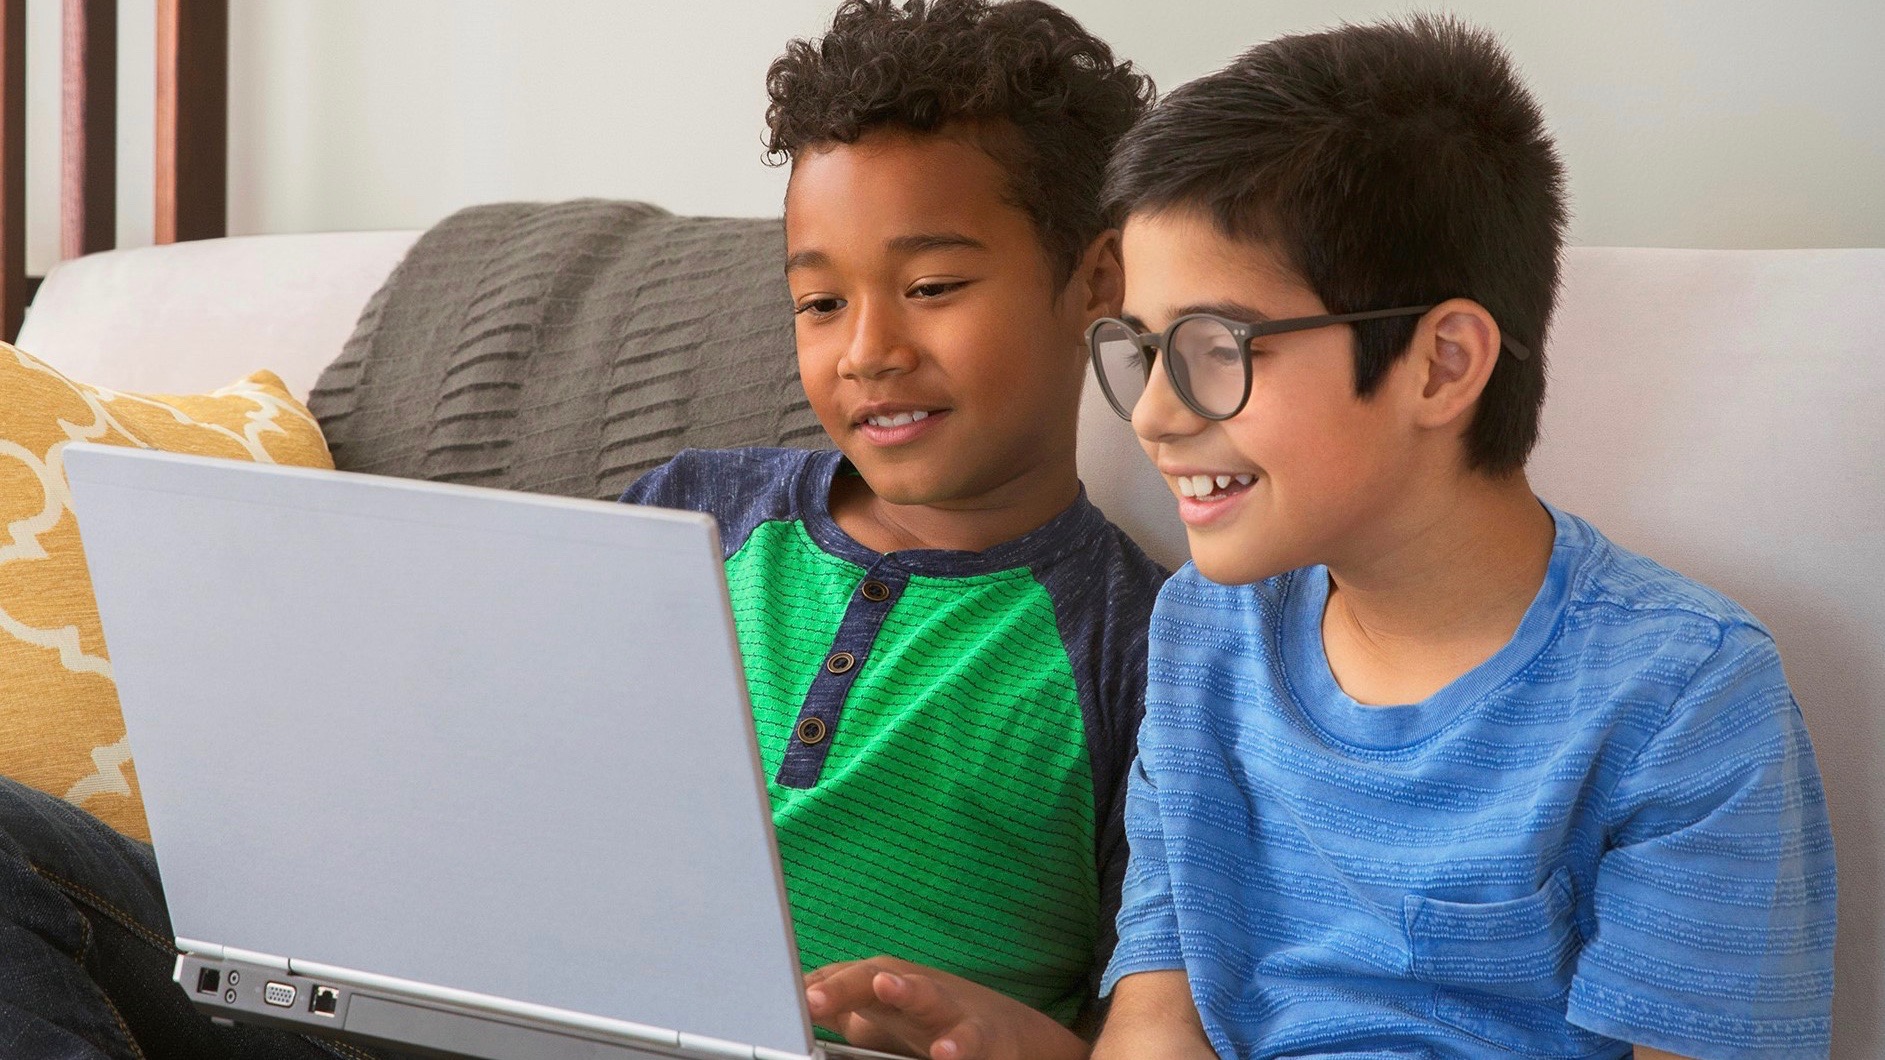 Two boys playing on a computer together